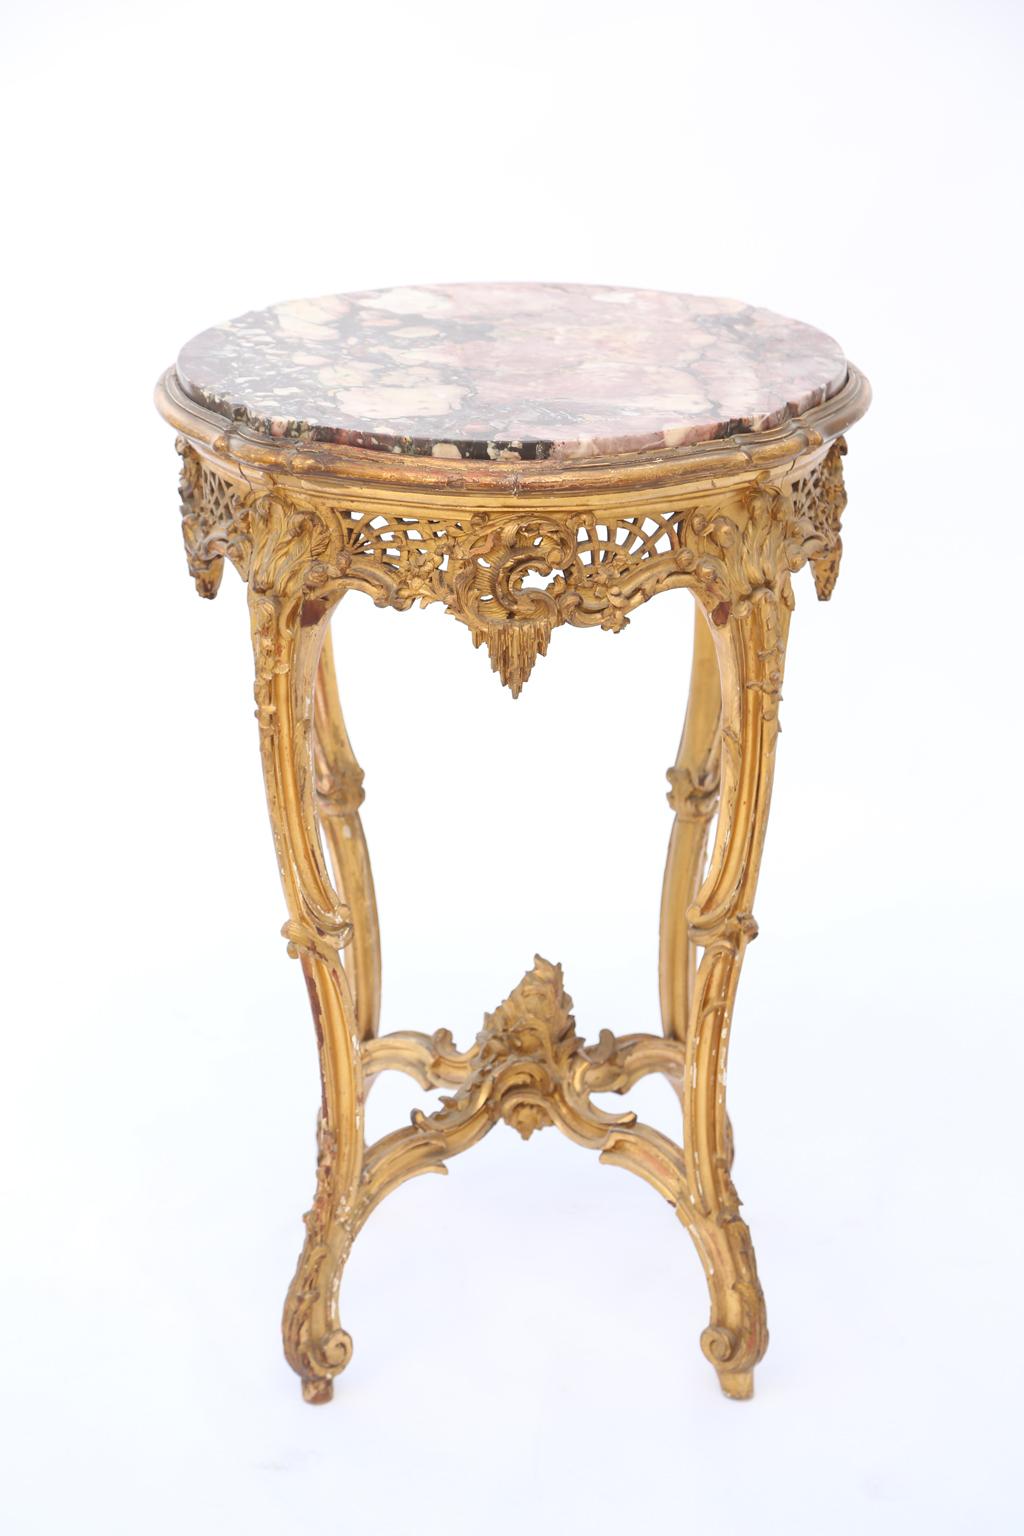 Rococo table, having a round top of rouge marble, on carved giltwood base, its pierced, reticulated apron decorated with C-scrolls and combing, raised on shaped, hock-legs, joined by channelled stretcher, centered by foliate-carved accents, ending